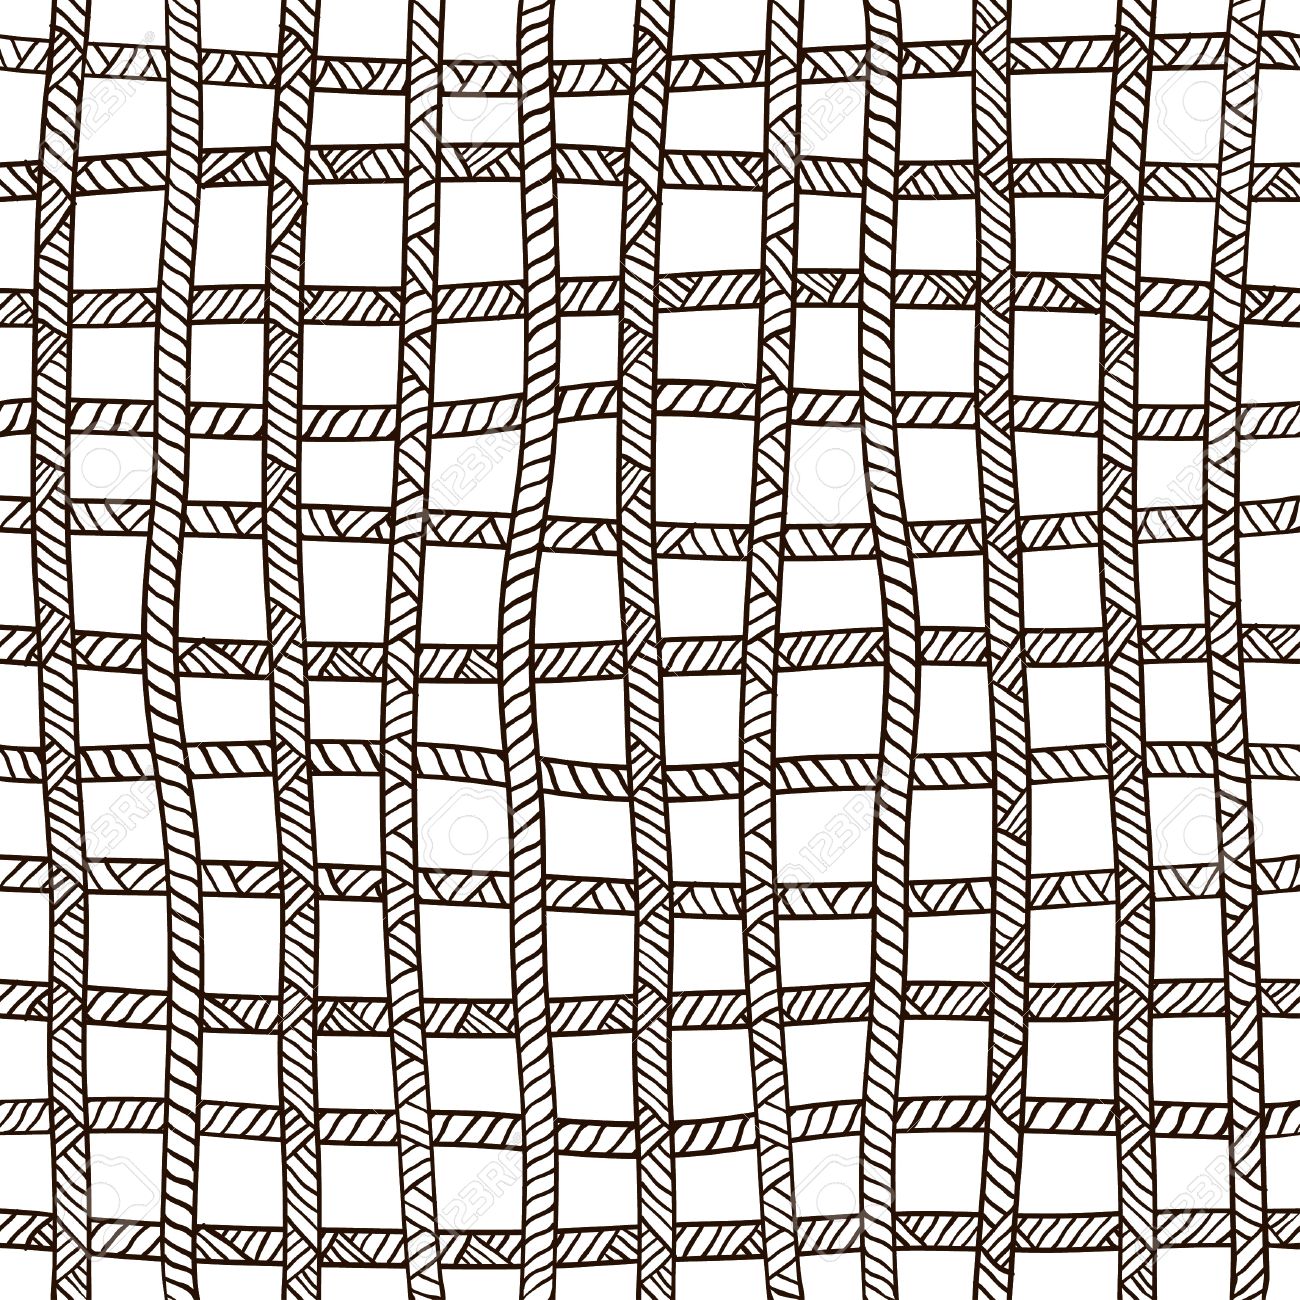 Plaid clipart black and white 